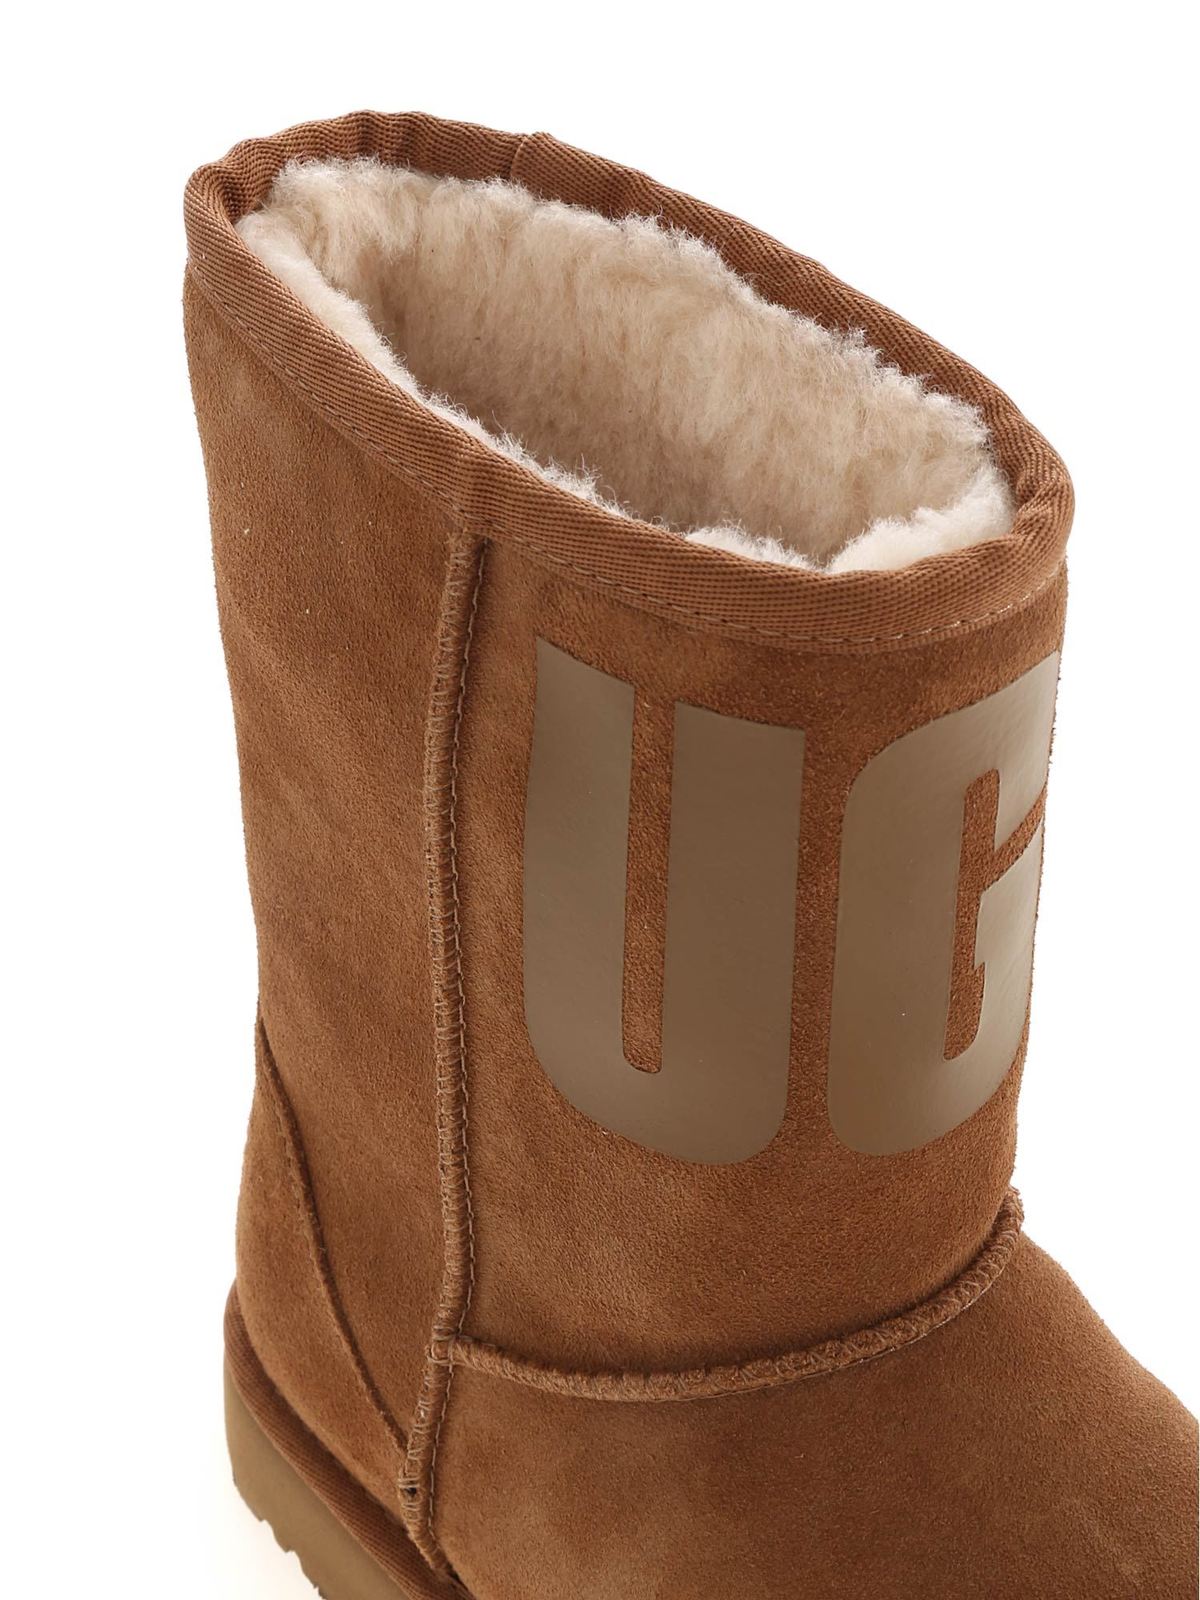 ugg australia ankle boots